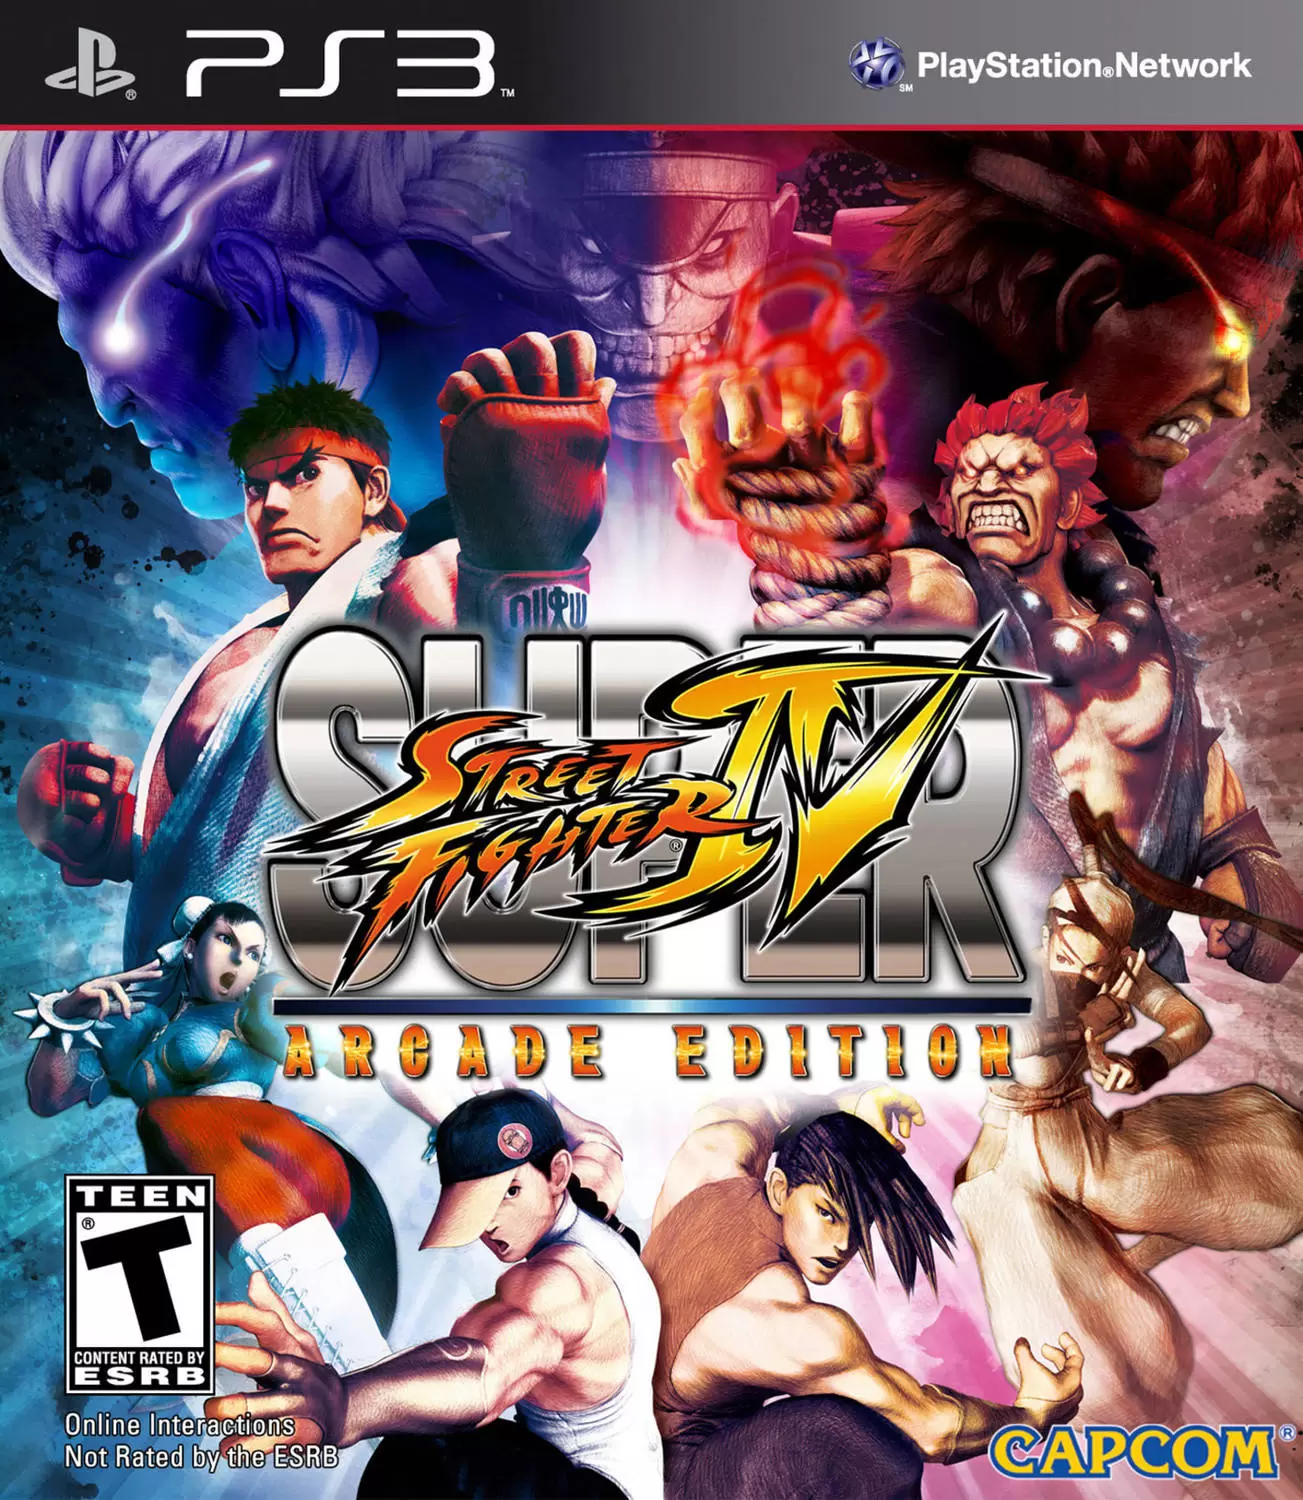 PS3 Games - Super Street Fighter IV: Arcade Edition